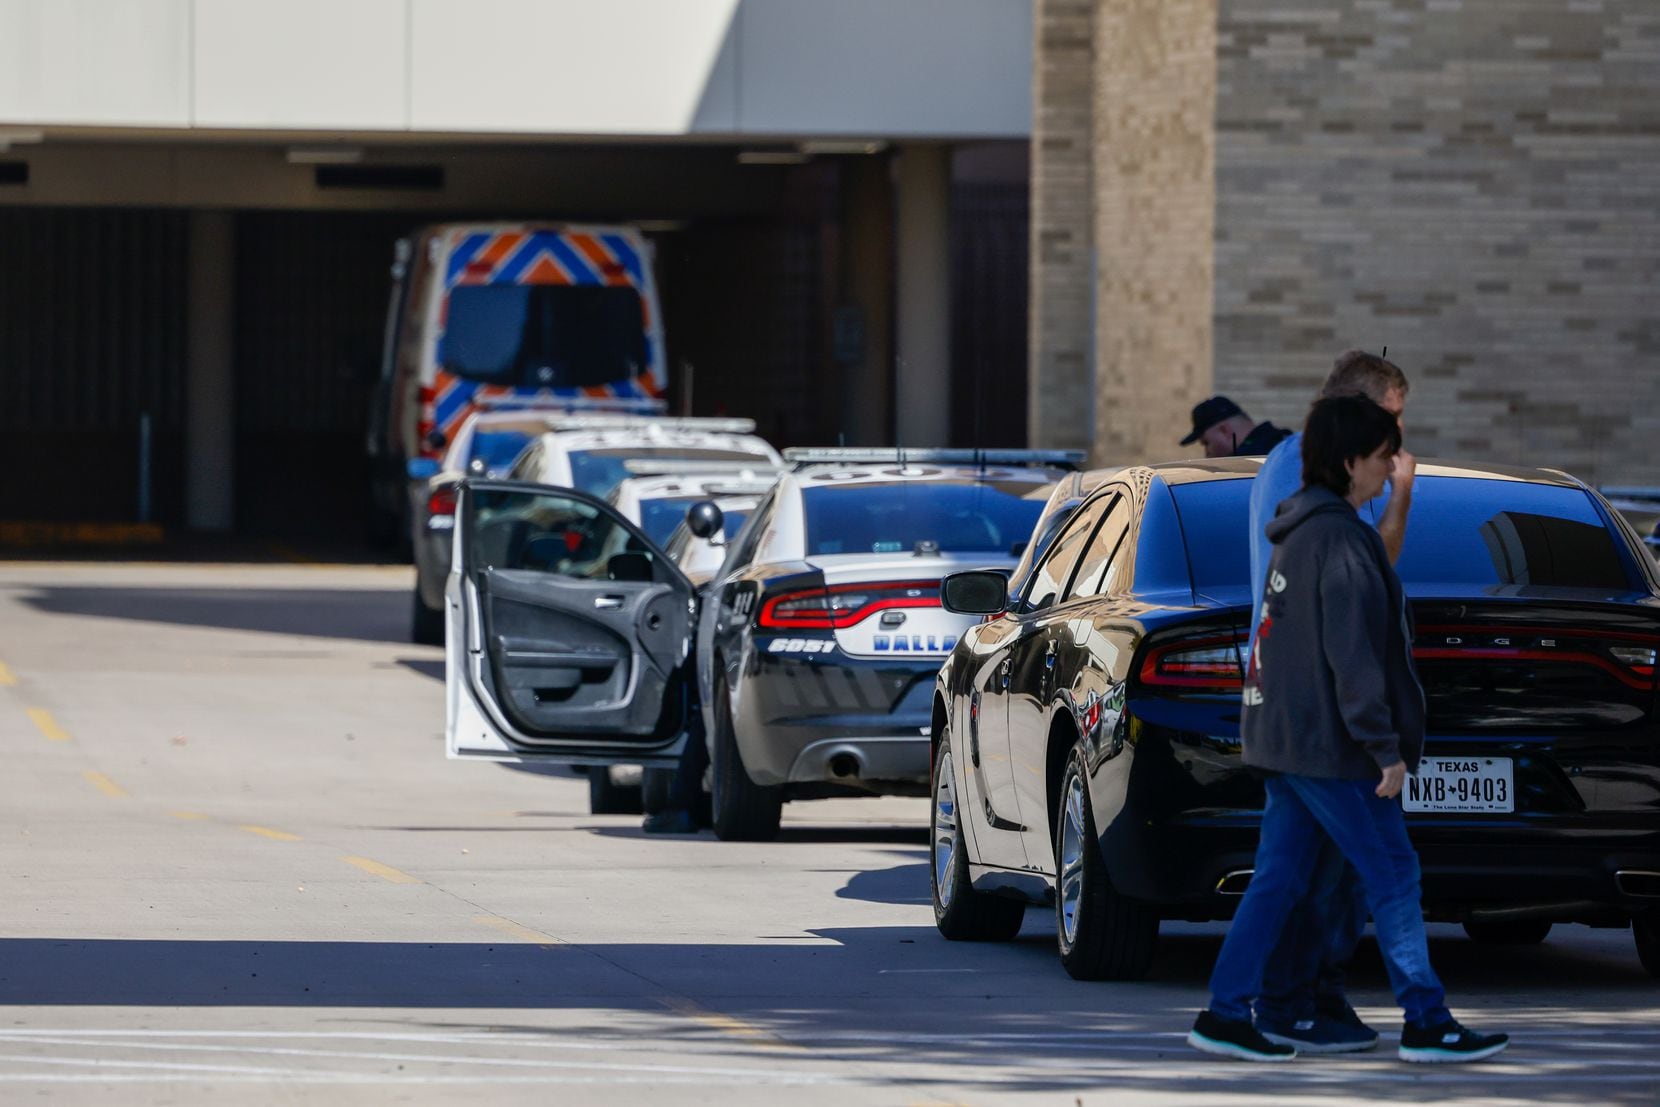 Dallas police responded to an active shooter incident at Methodist Dallas Medical Center on...